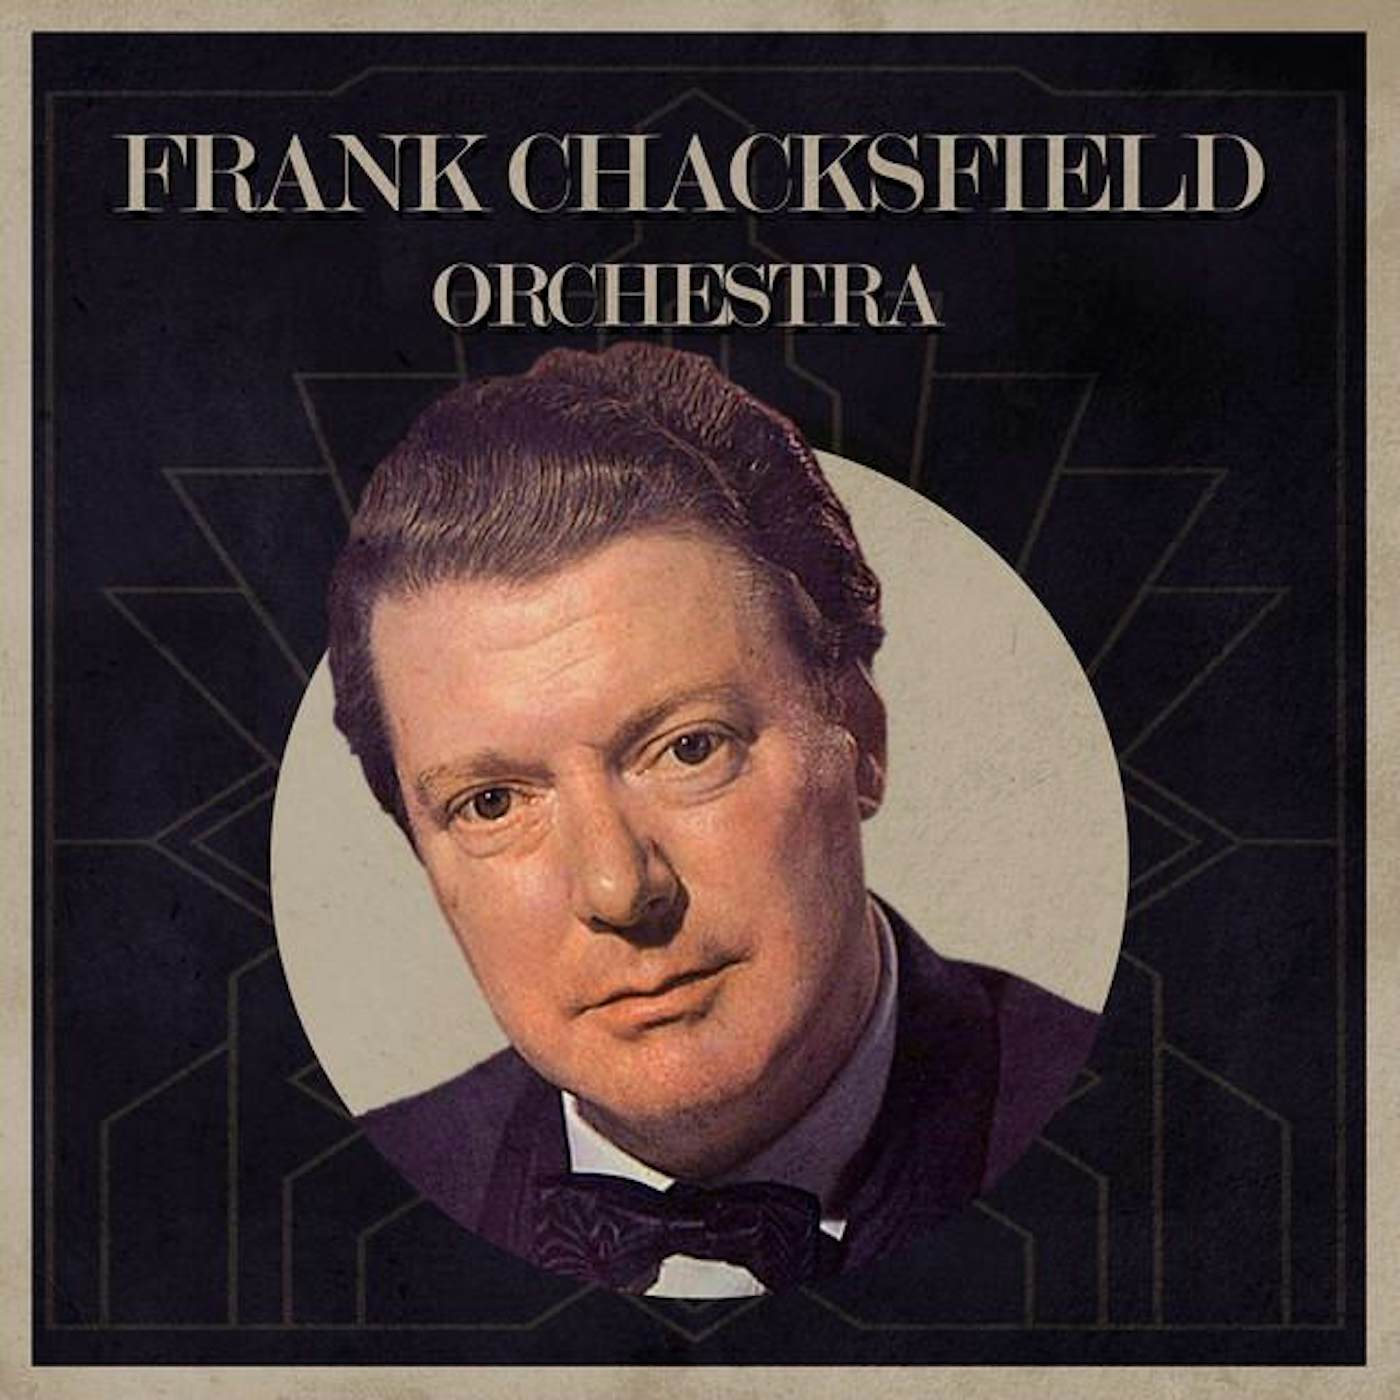 Frank Chacksfield Orchestra